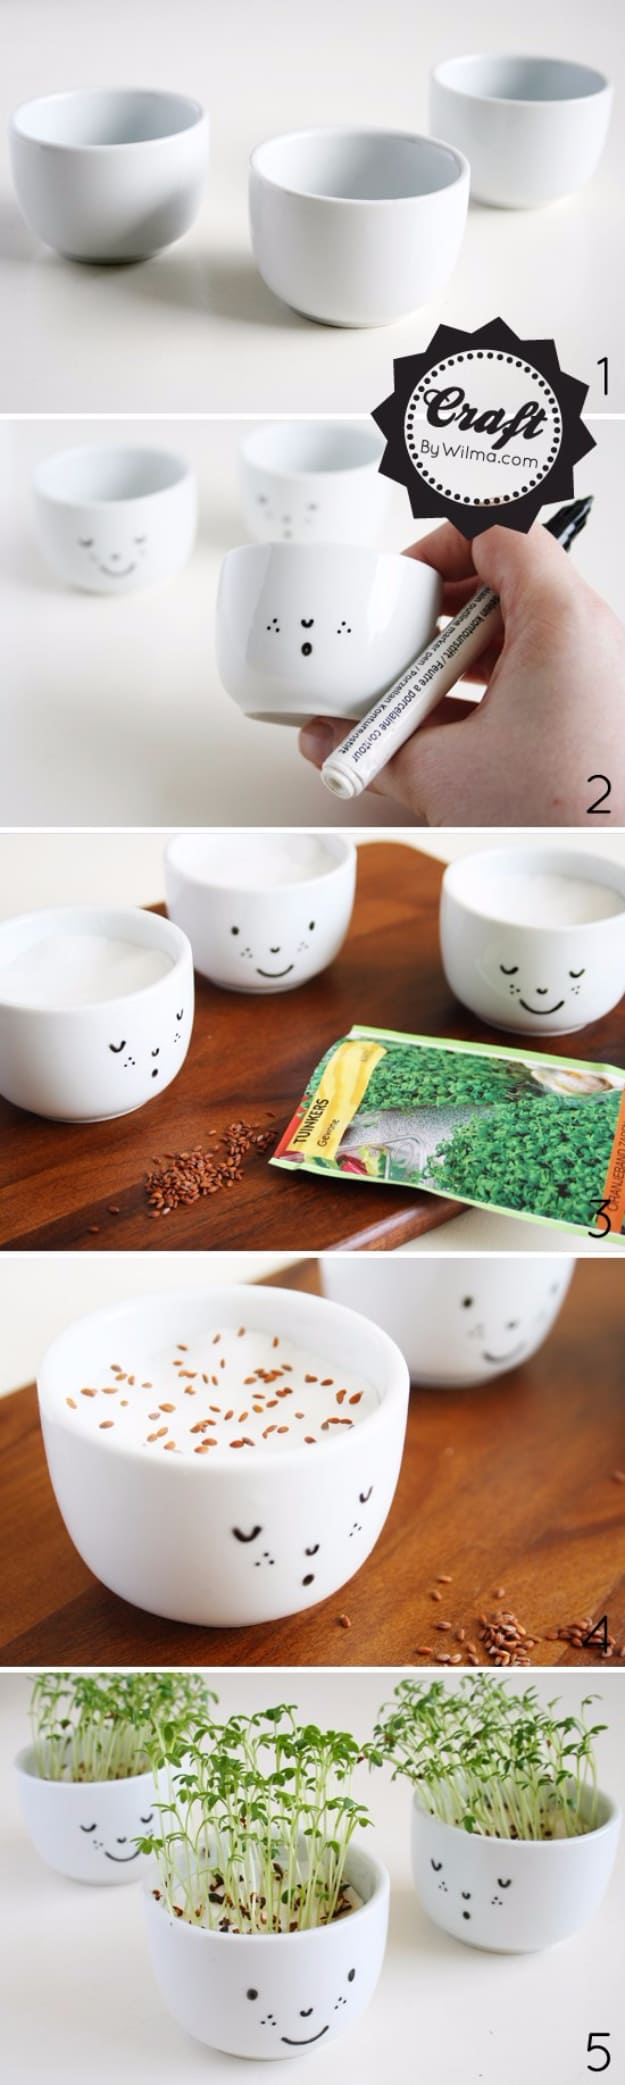 Diy cress cups with a face